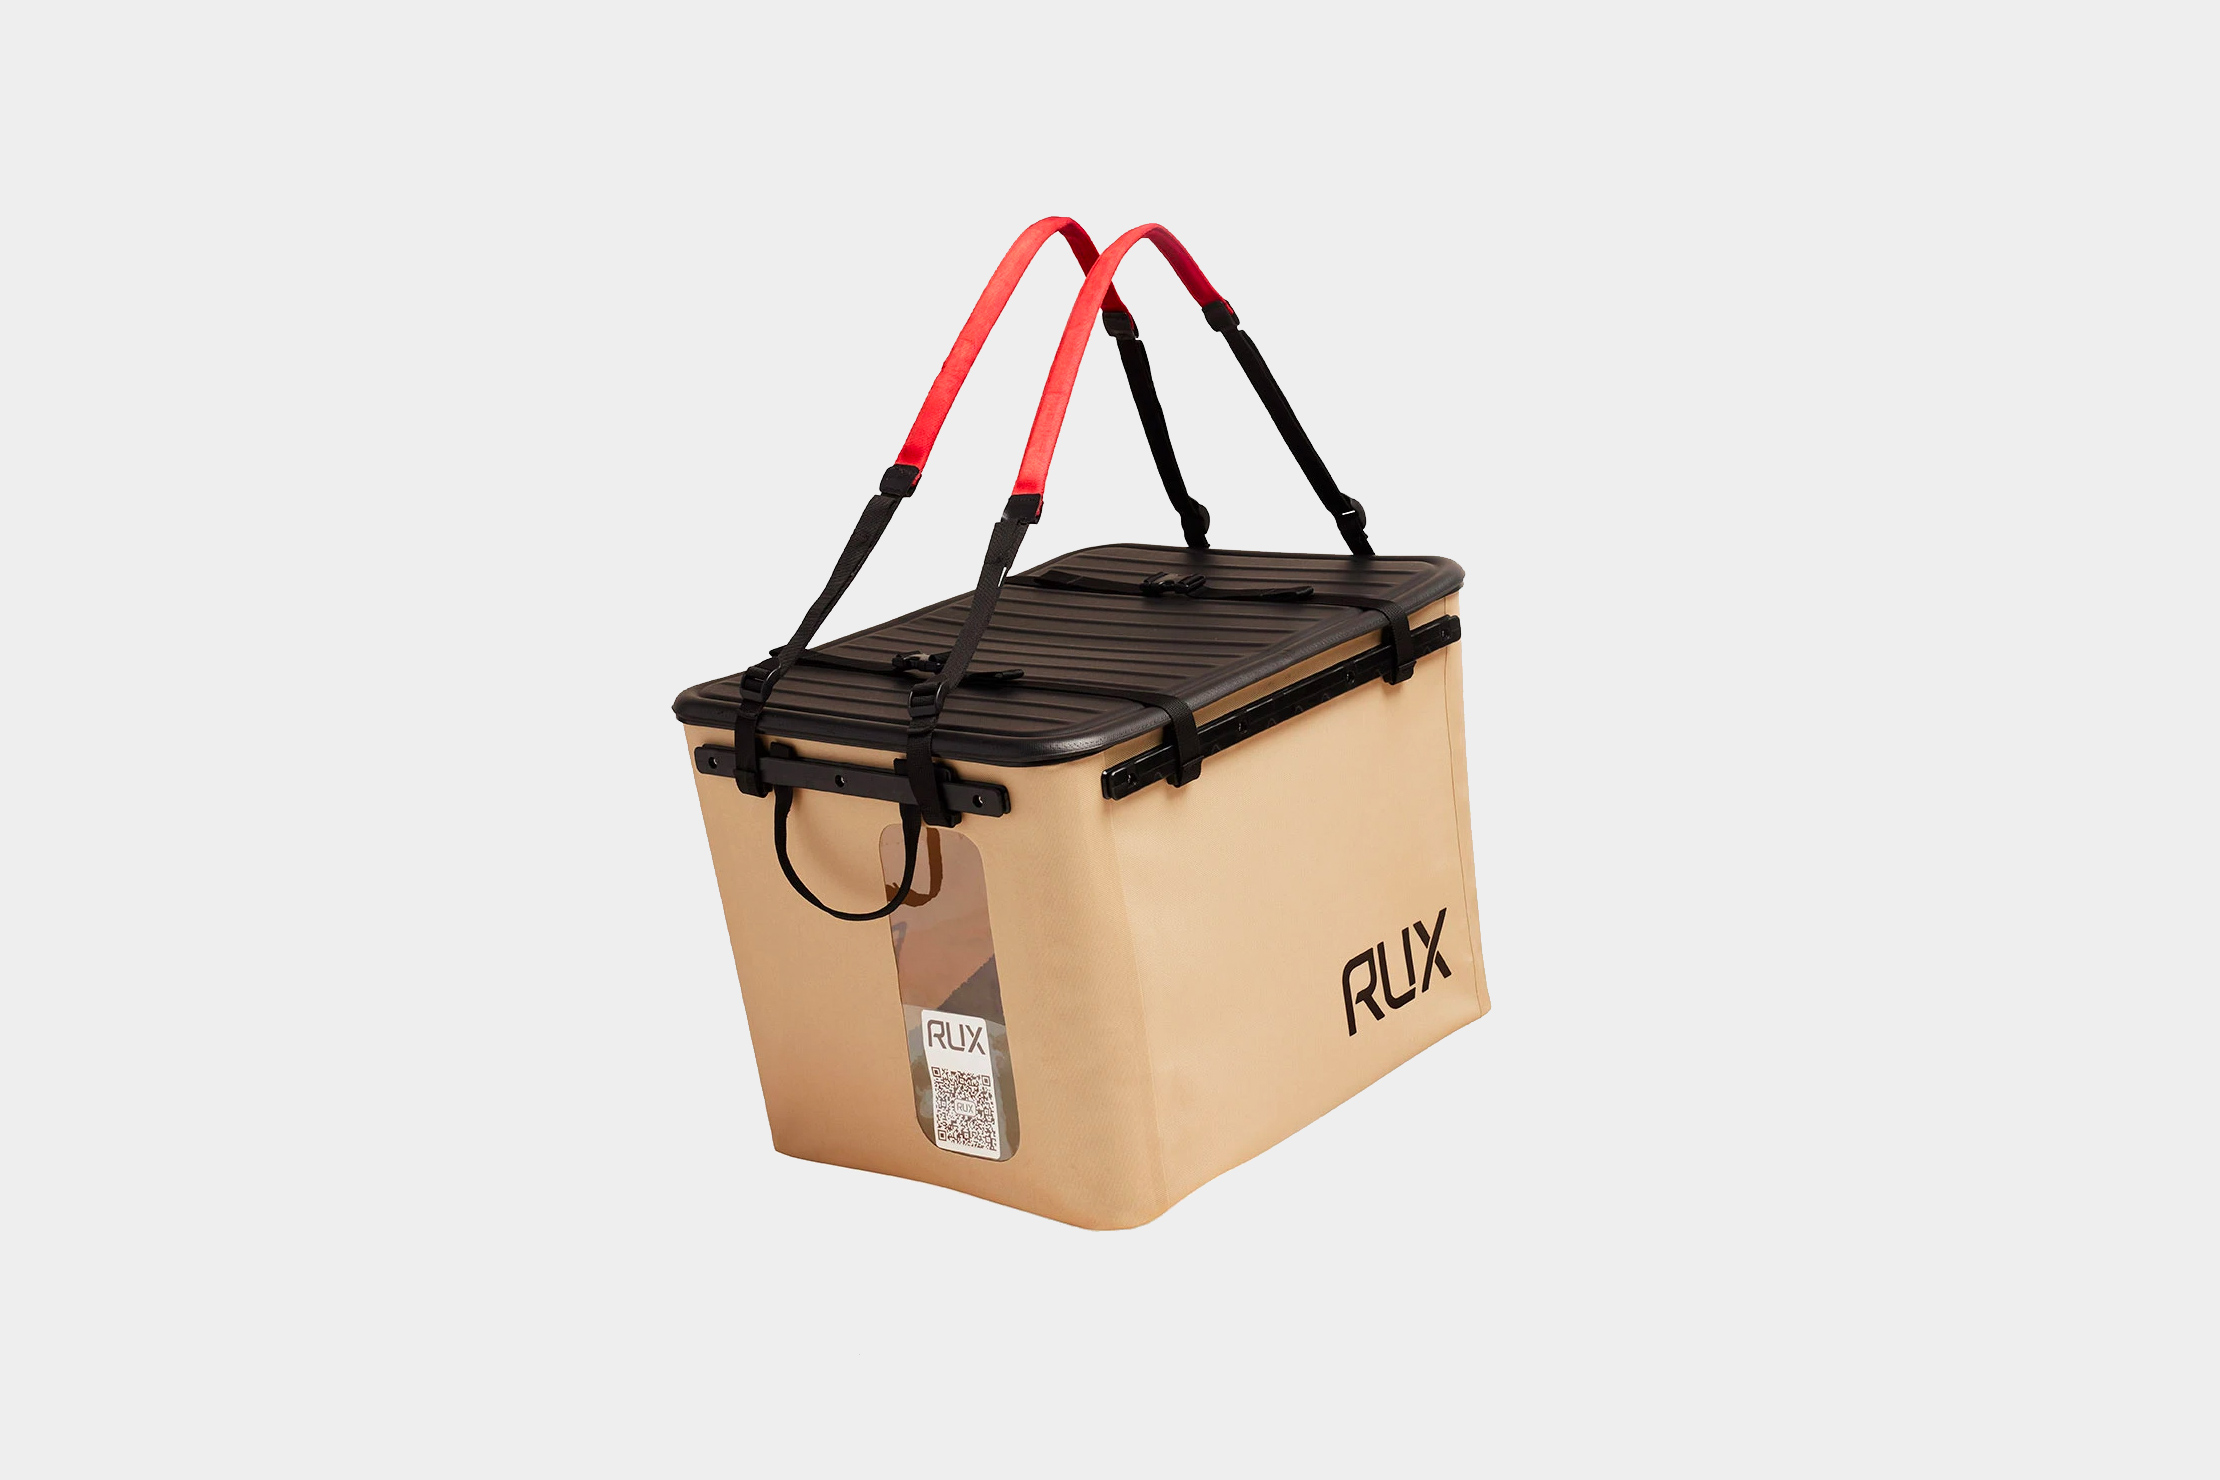 The Most Expensive, Versatile Storage Bin Ever: RUX 70L Review